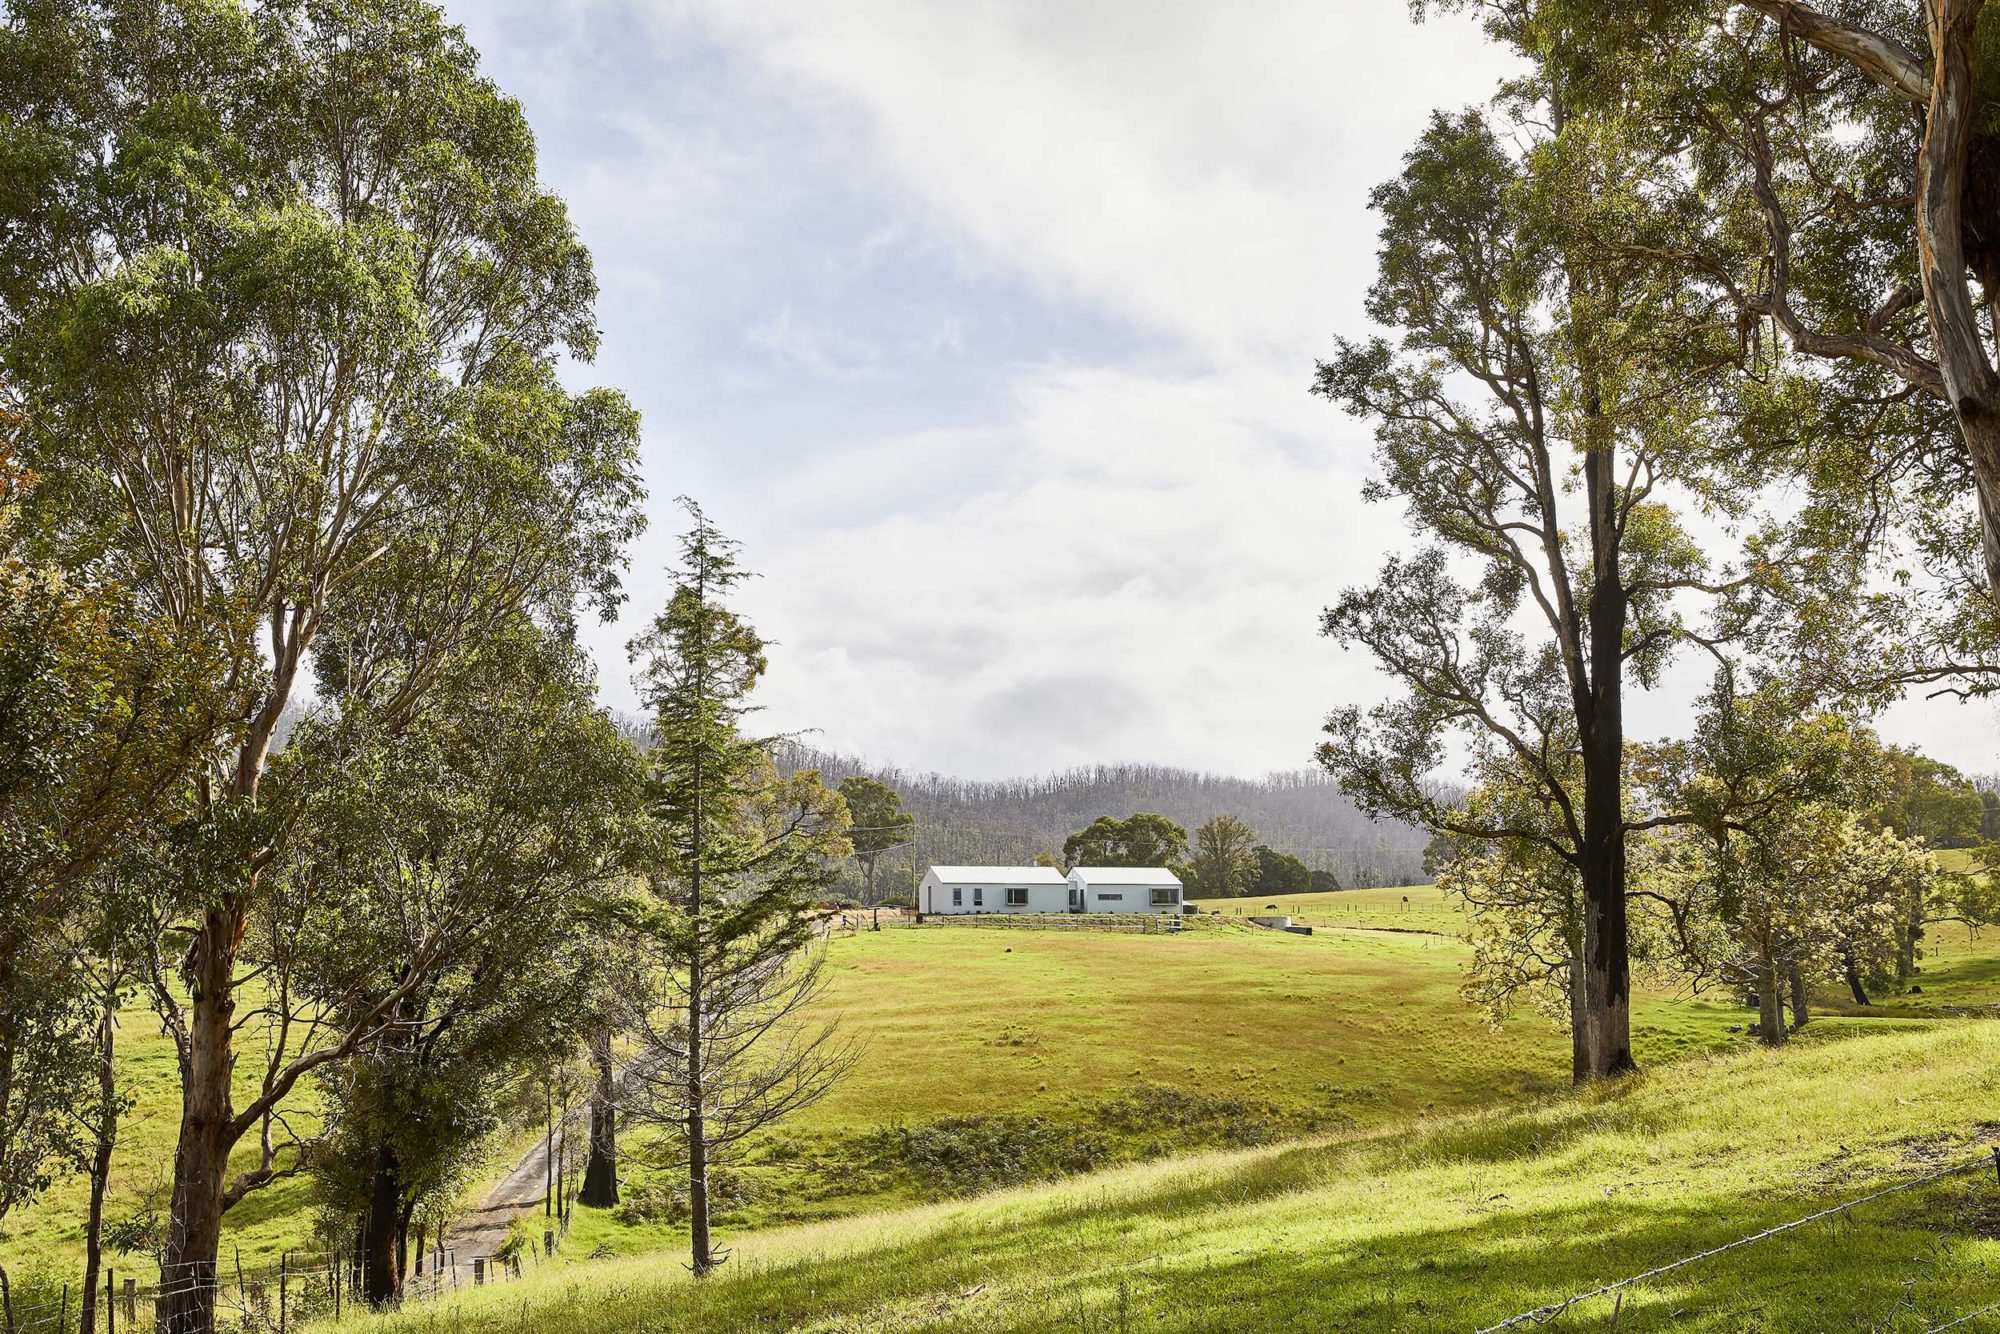 Building amongst the rolling hills of the Australian country side